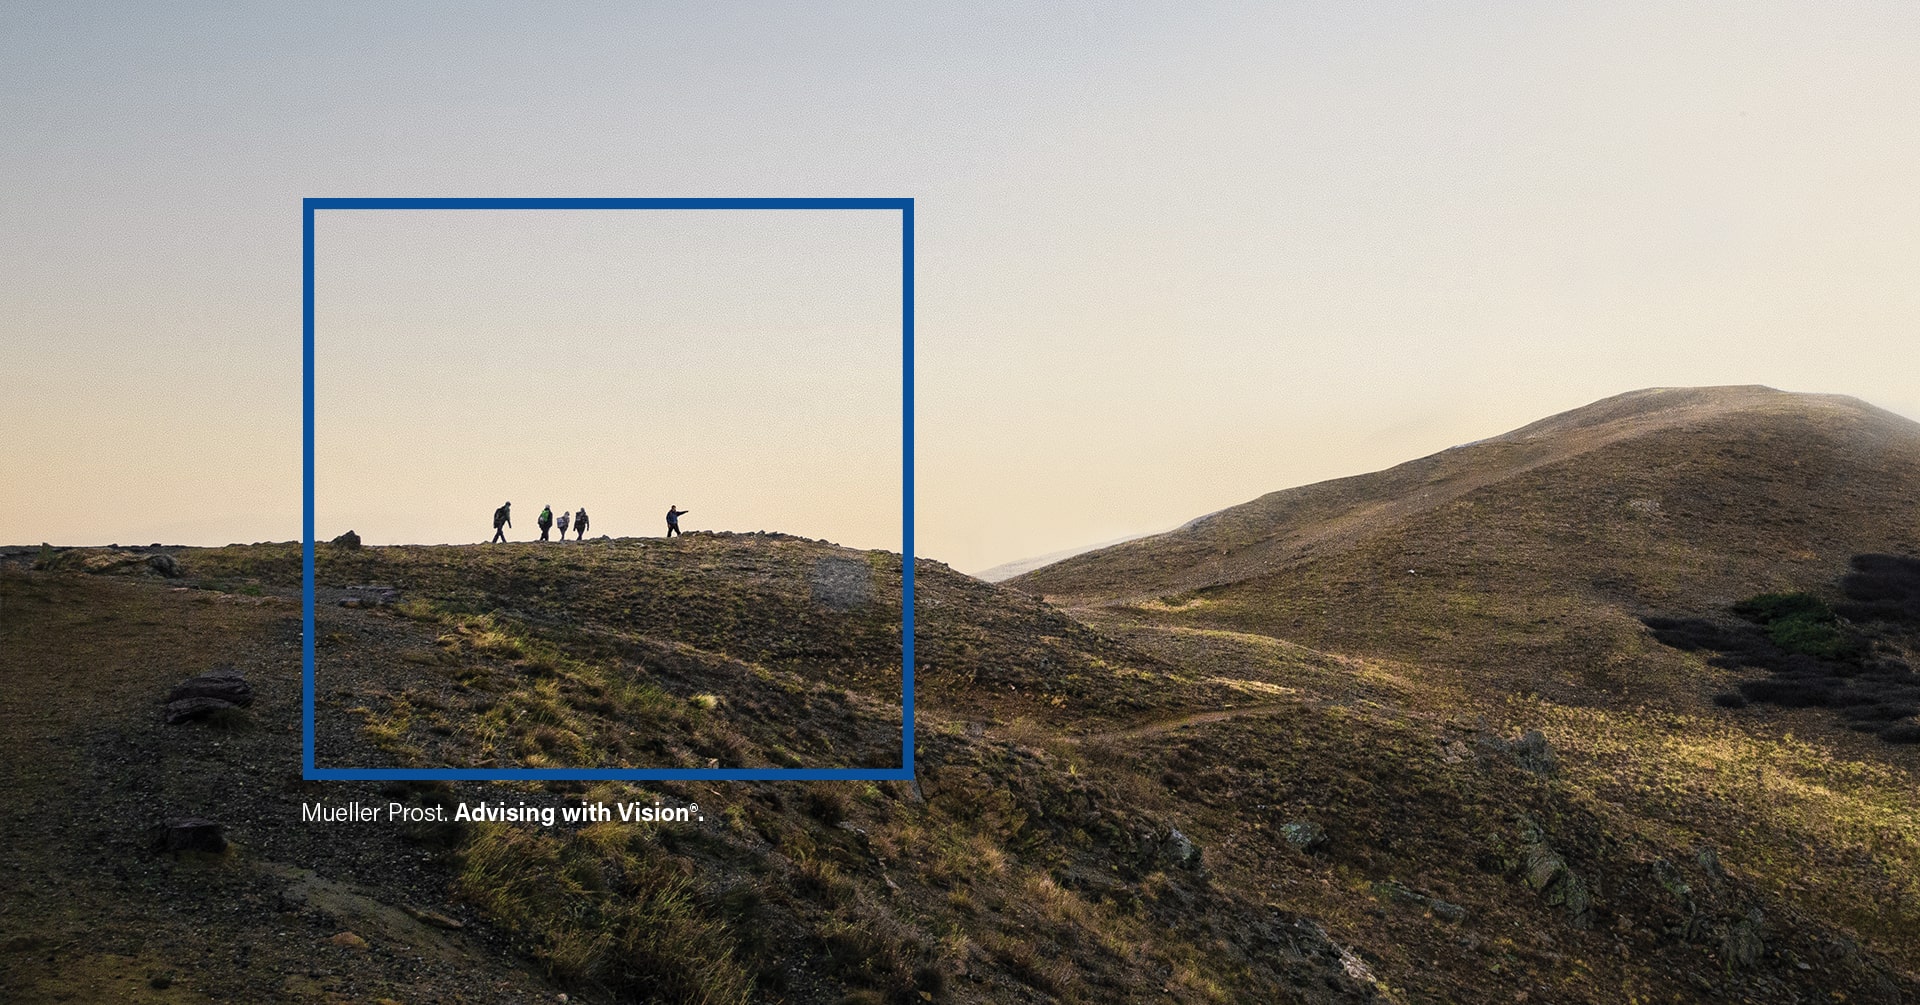 Graphic from the Mueller Prost website design shows a square over a photo of hikers with the words Advising with Vision